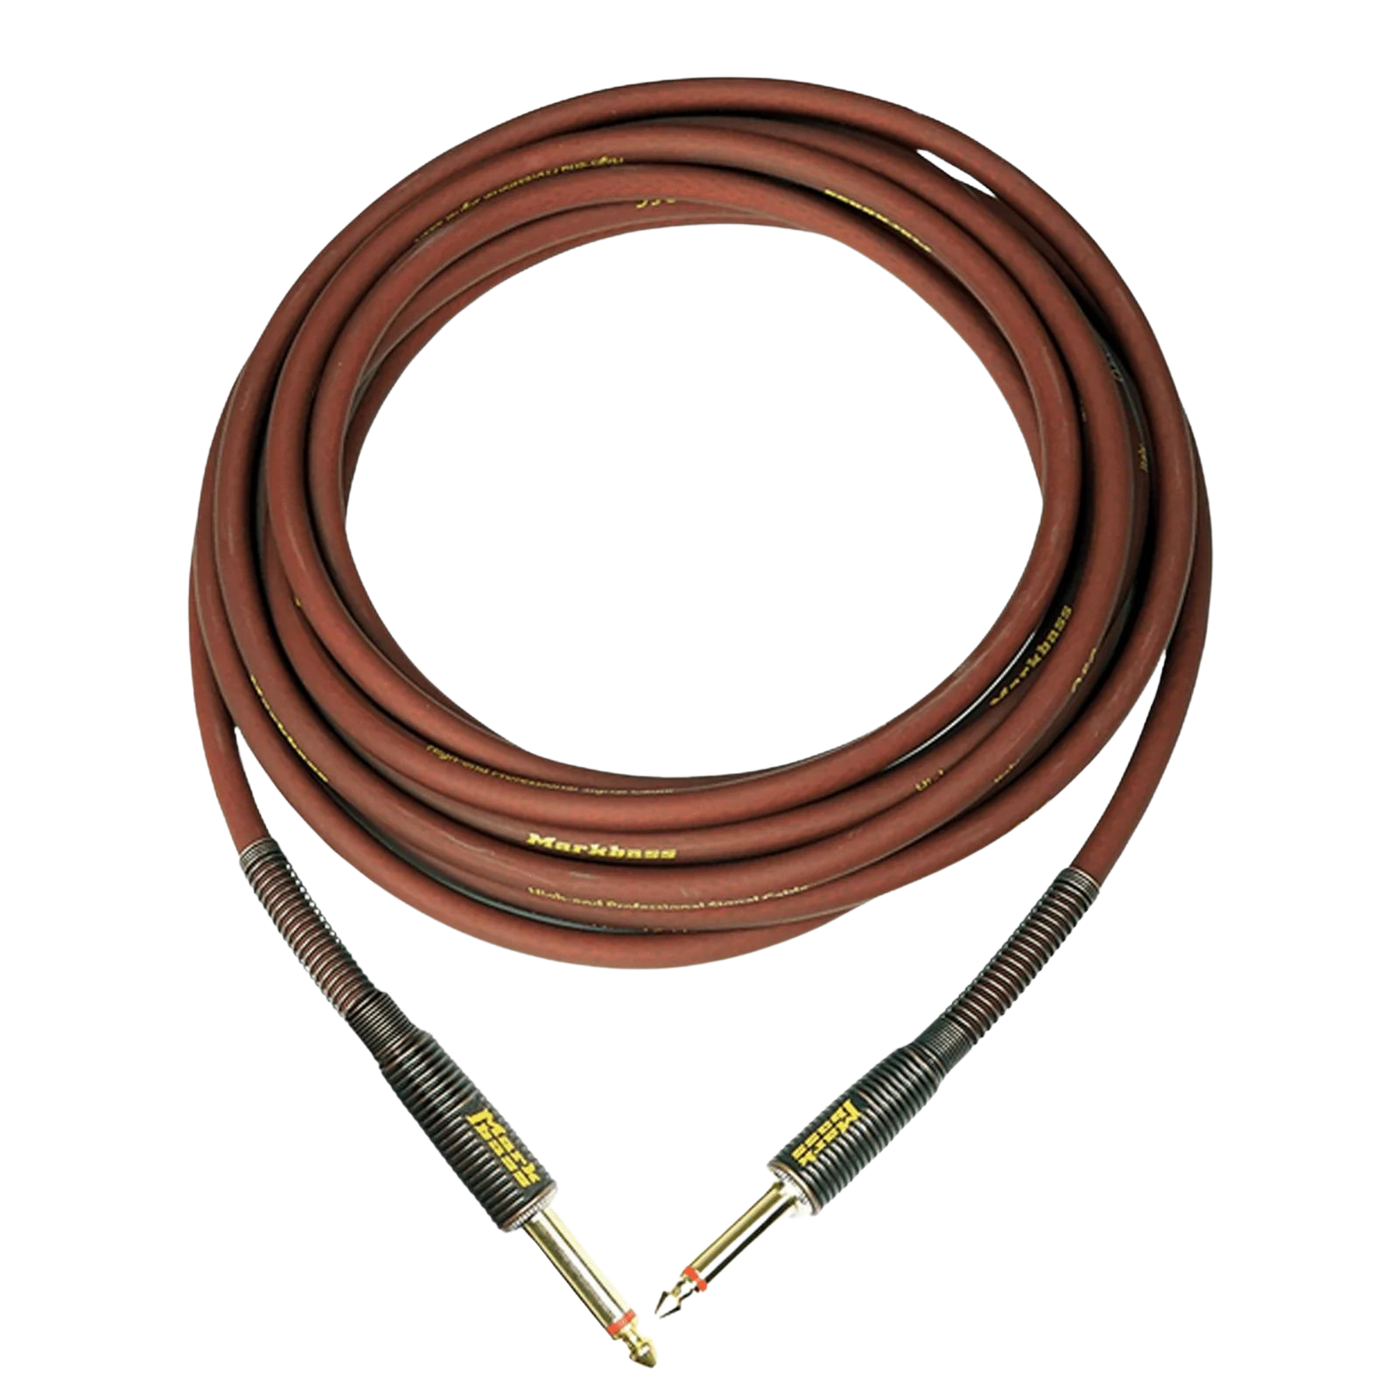 Markbass Super Signal Cable (St to St)